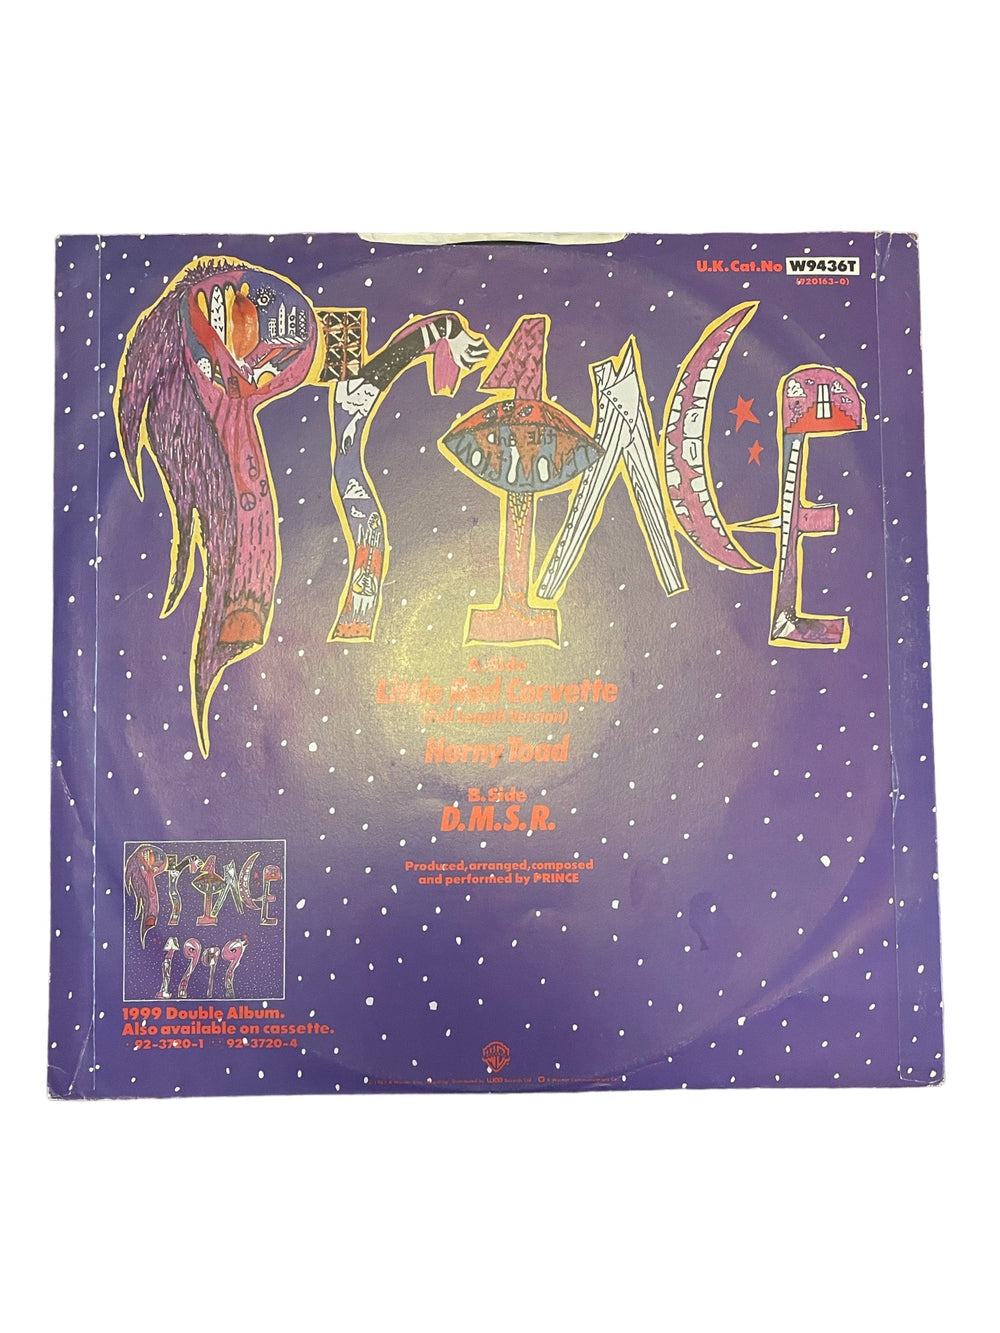 Prince – Little Red Corvette Horny Toad 12 Inch Vinyl Single UK W9436T Condition V Good